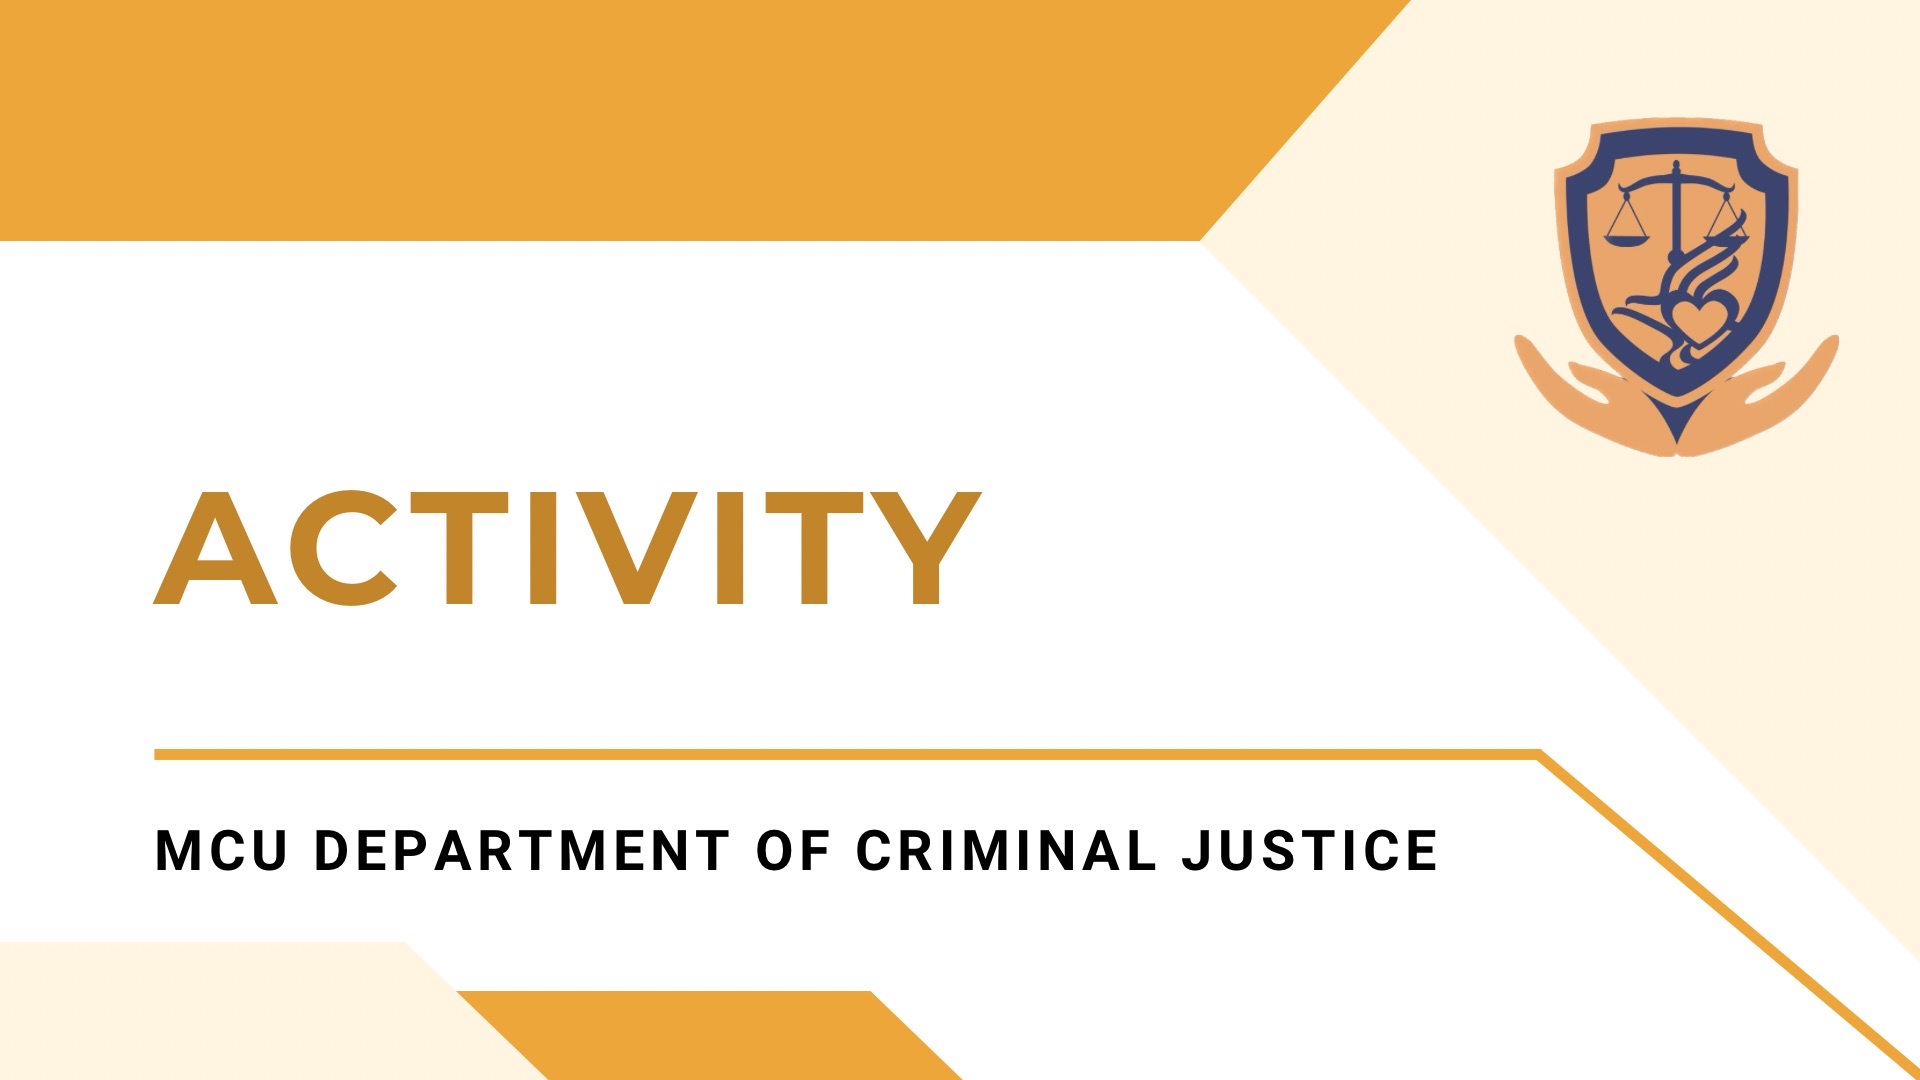 Featured image for “The Academy of Social Sciences issued the appointment letter for the principal and deputy director of the Center for Comparative Criminal Justice”